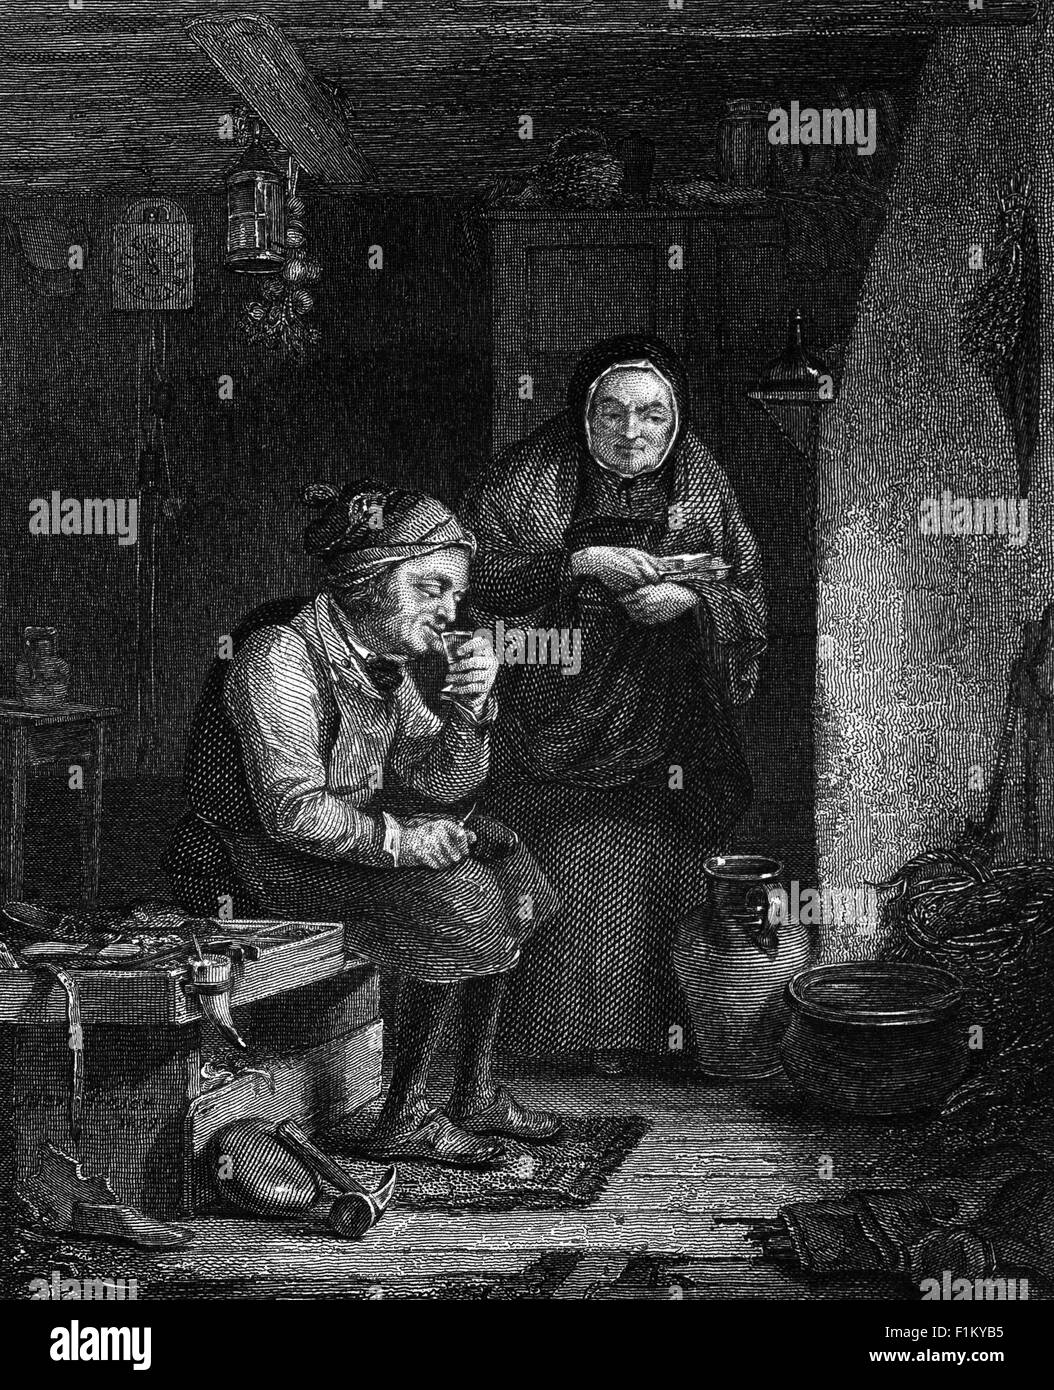 An Illustration of 'The Cobbler' from 'The Cobbler of Duddingstone' by Alexander Whitelaw, published in 1833. 'The Cobbler' is a salutary comedy about knowing who your friends are. The action takes place in various locations in the village, most of them gone now, except for the Sheep Heid Inn. Duddingston is in the east of Edinburgh, Scotland. Stock Photo